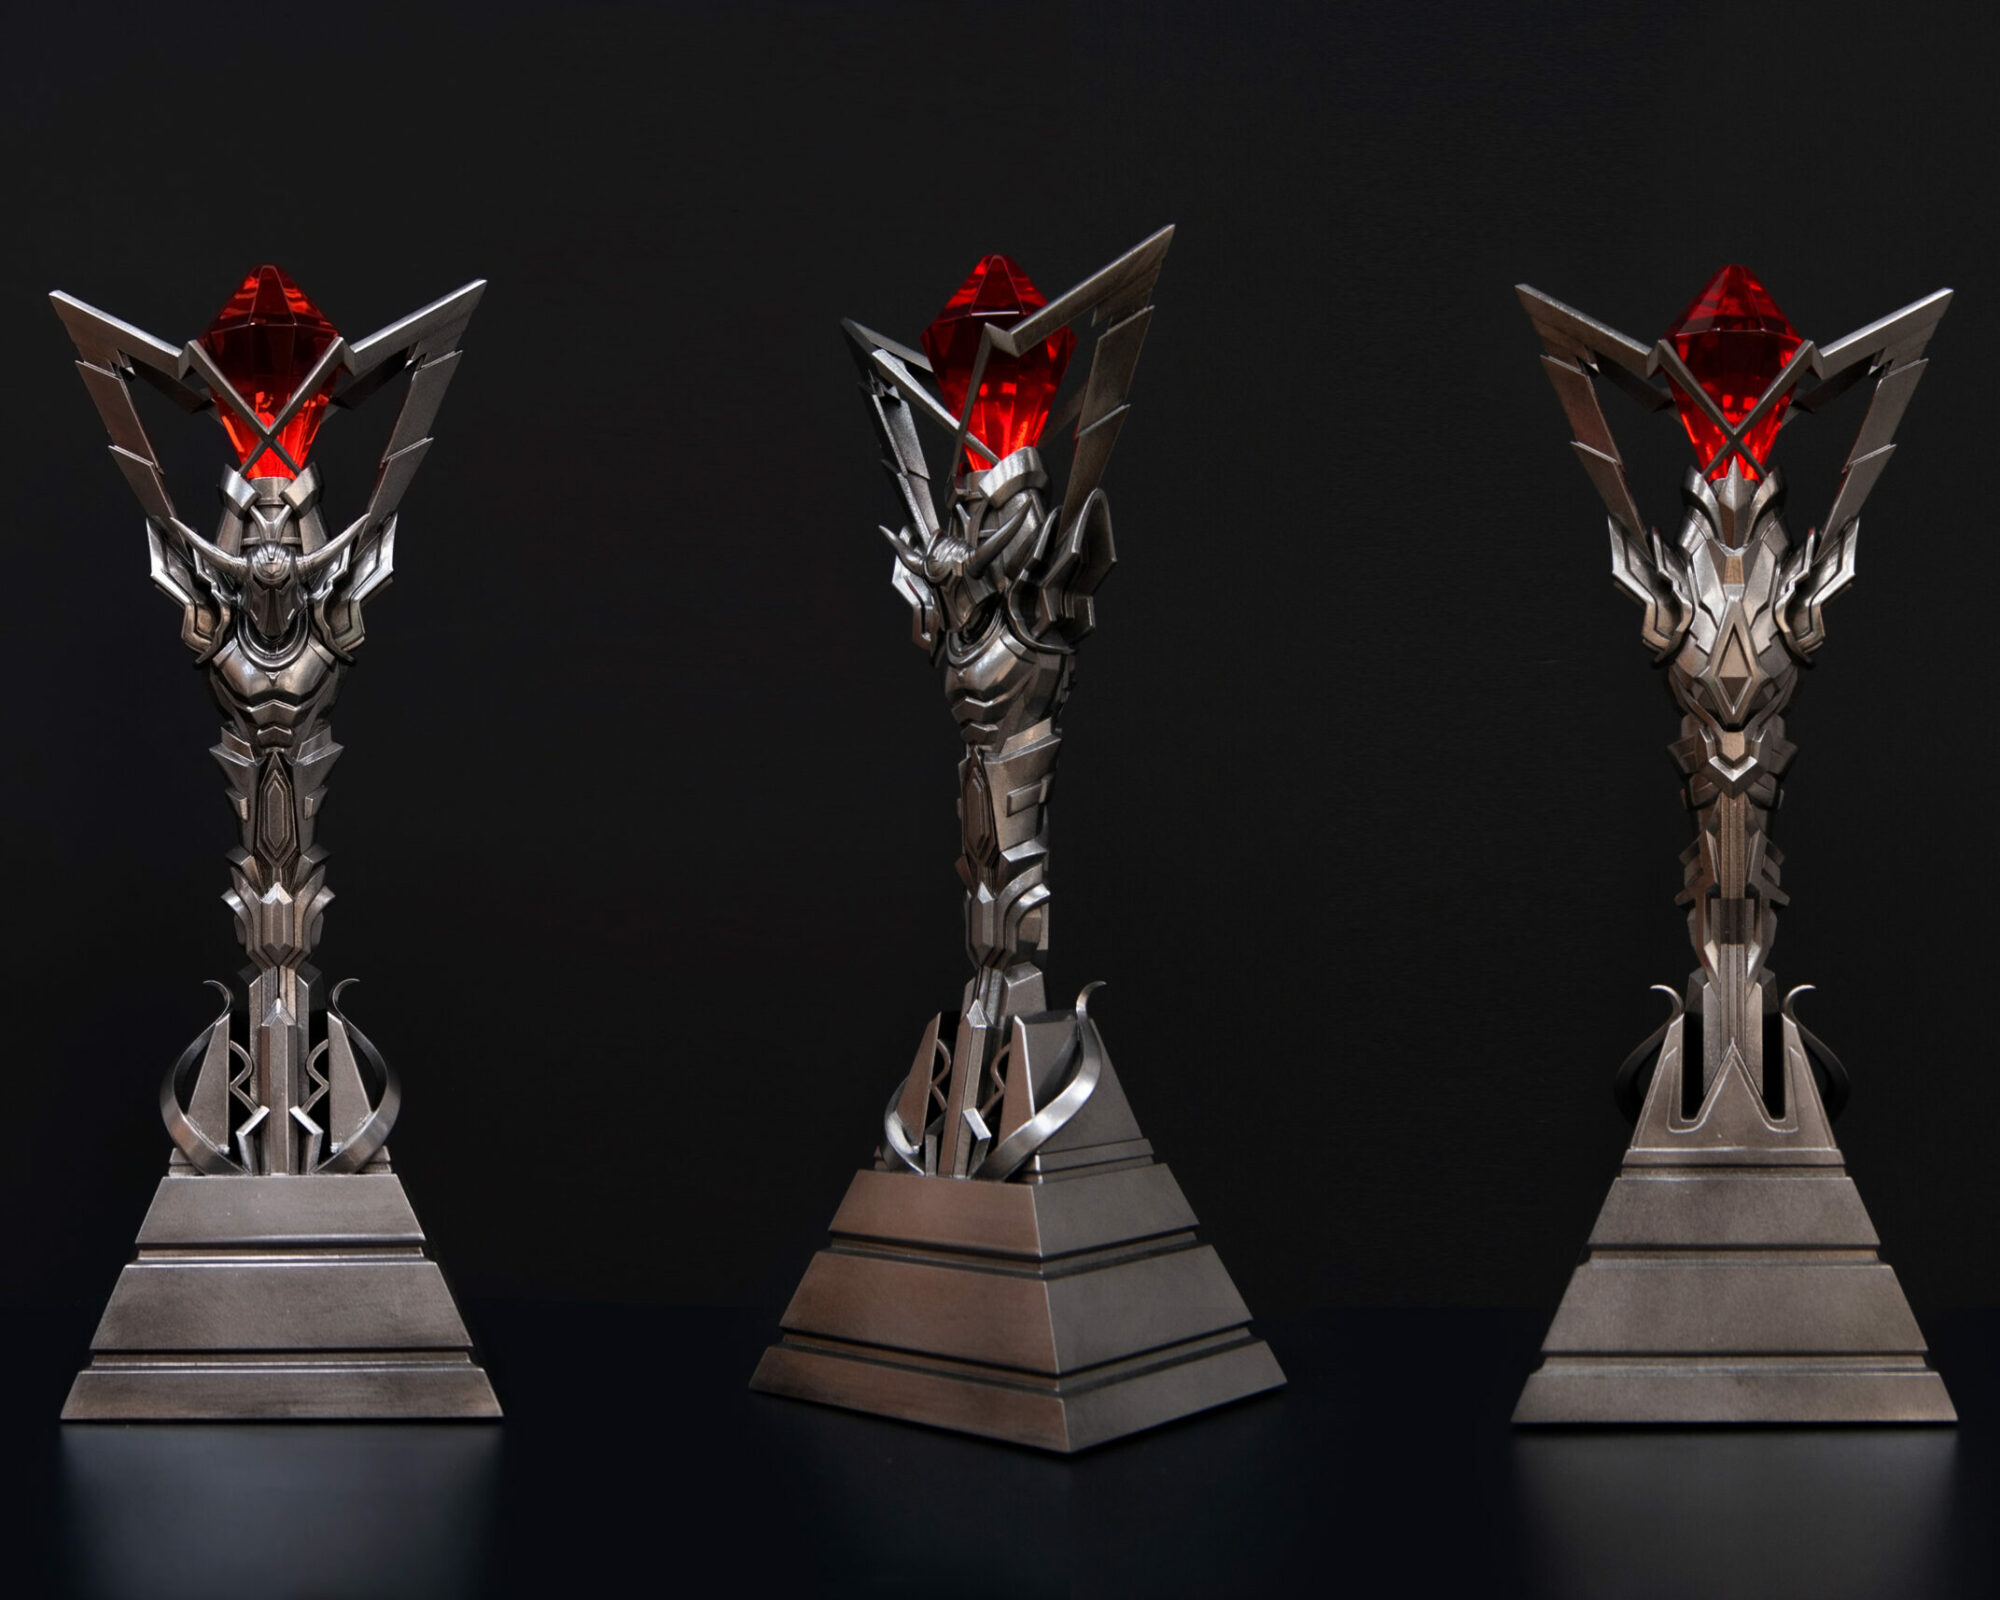 Tellure - trophy study for League of Legends